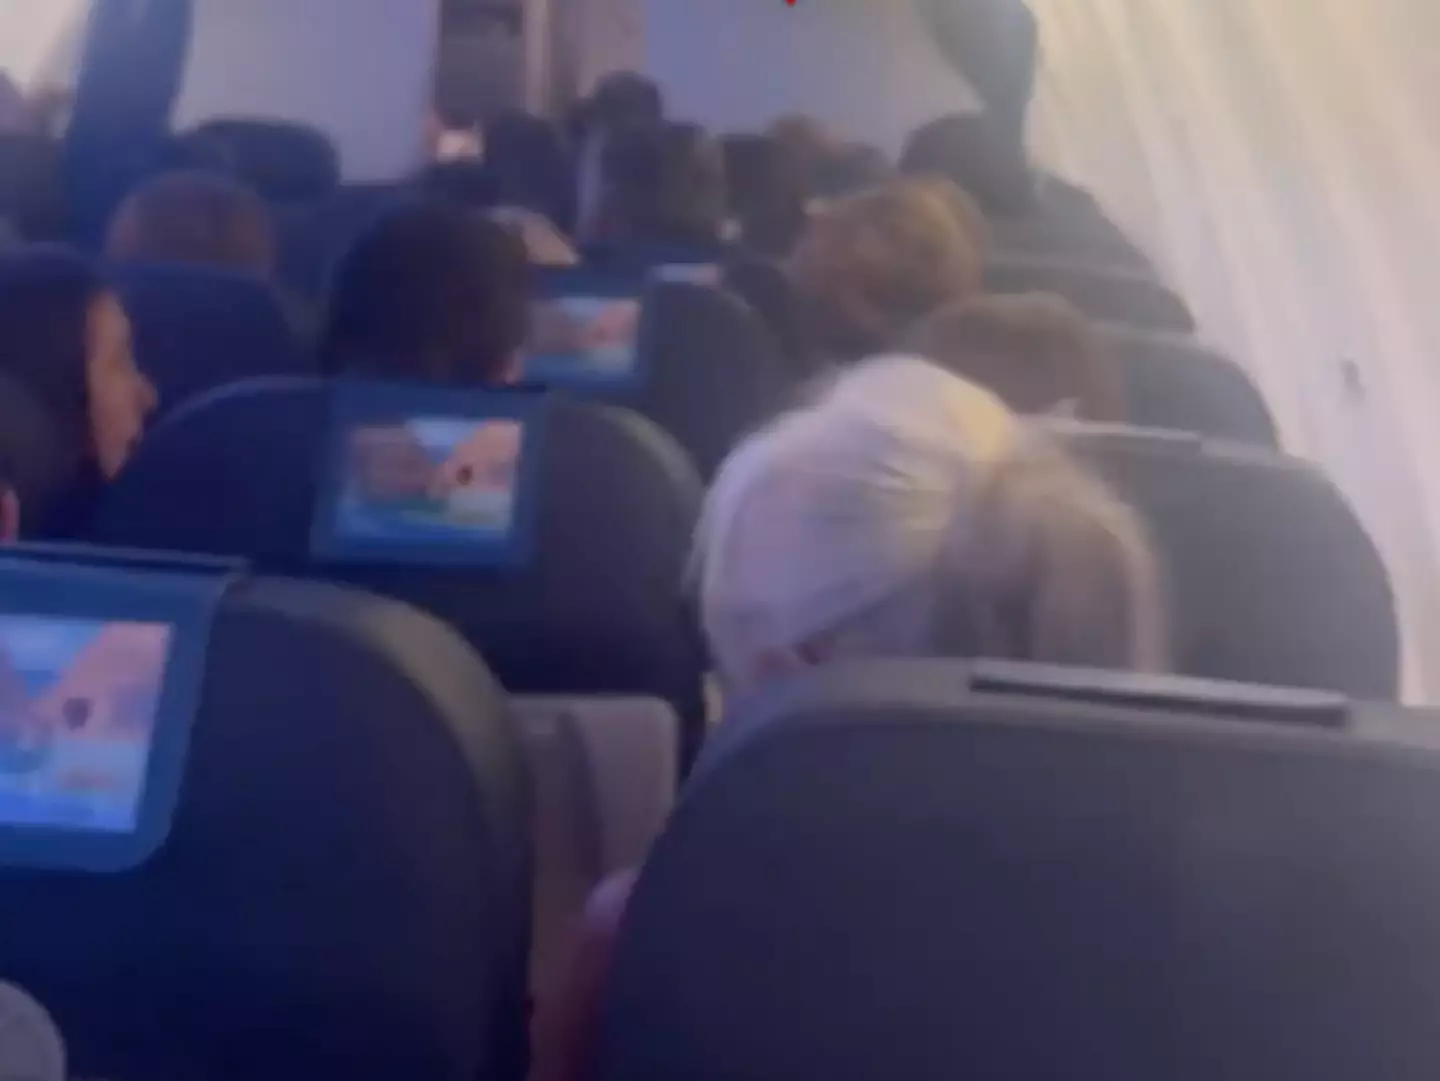 Passengers could be heard screaming on the flight.